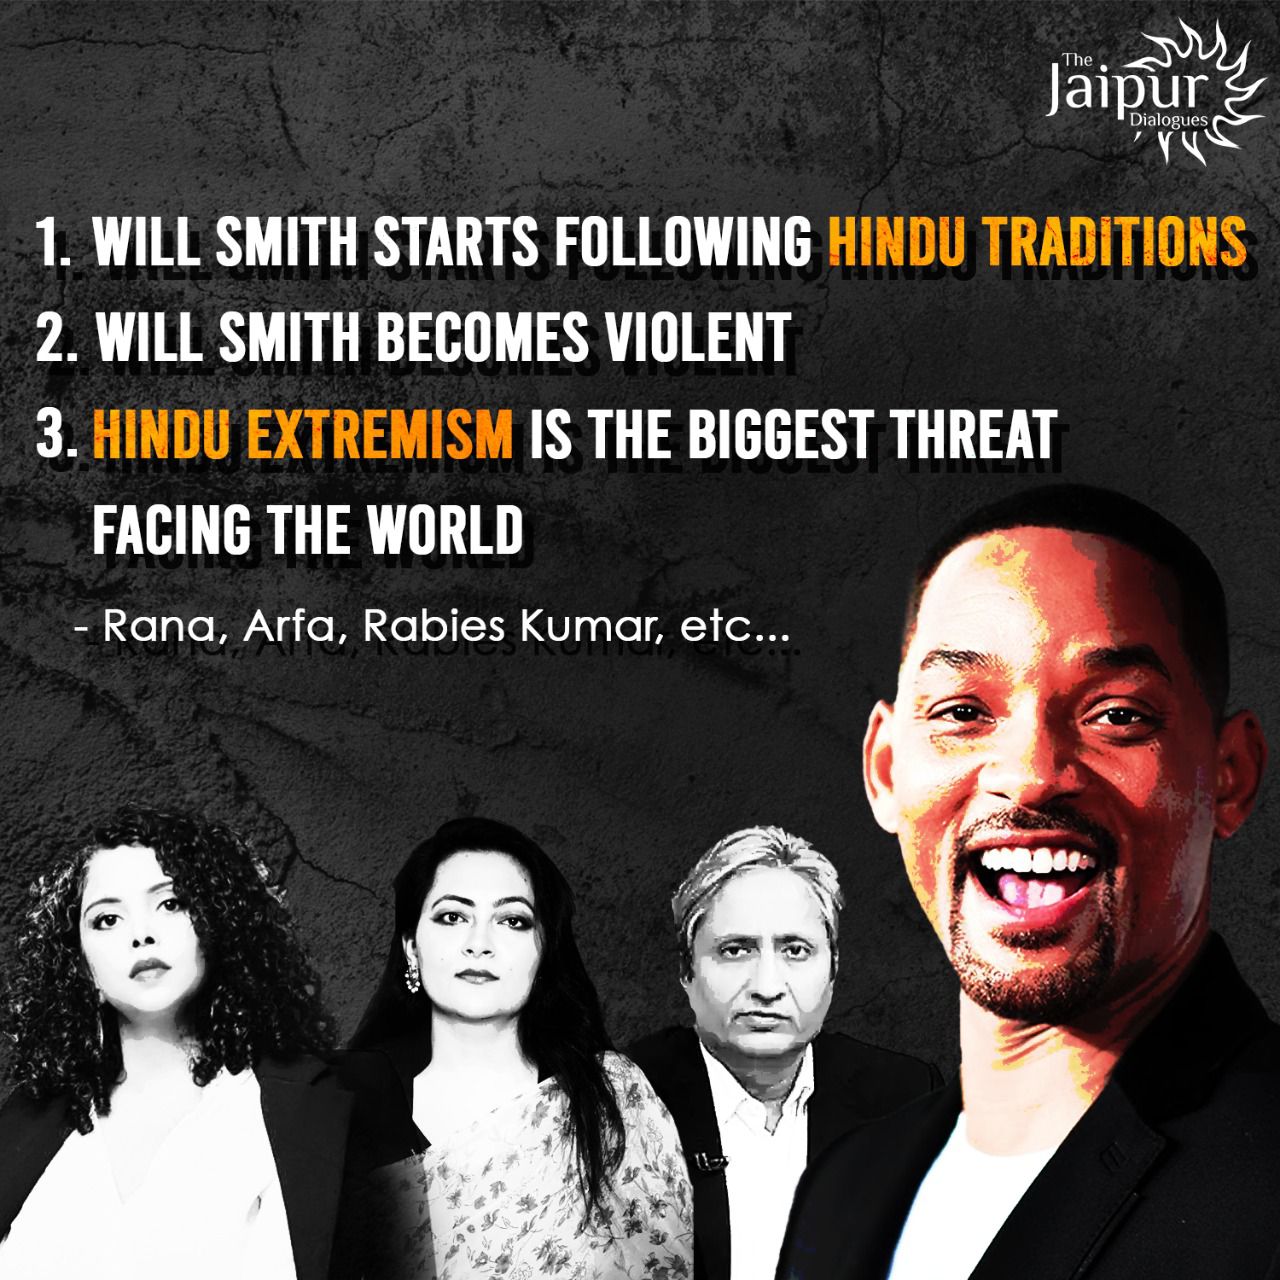 Hindu extremism is a threat to the World.